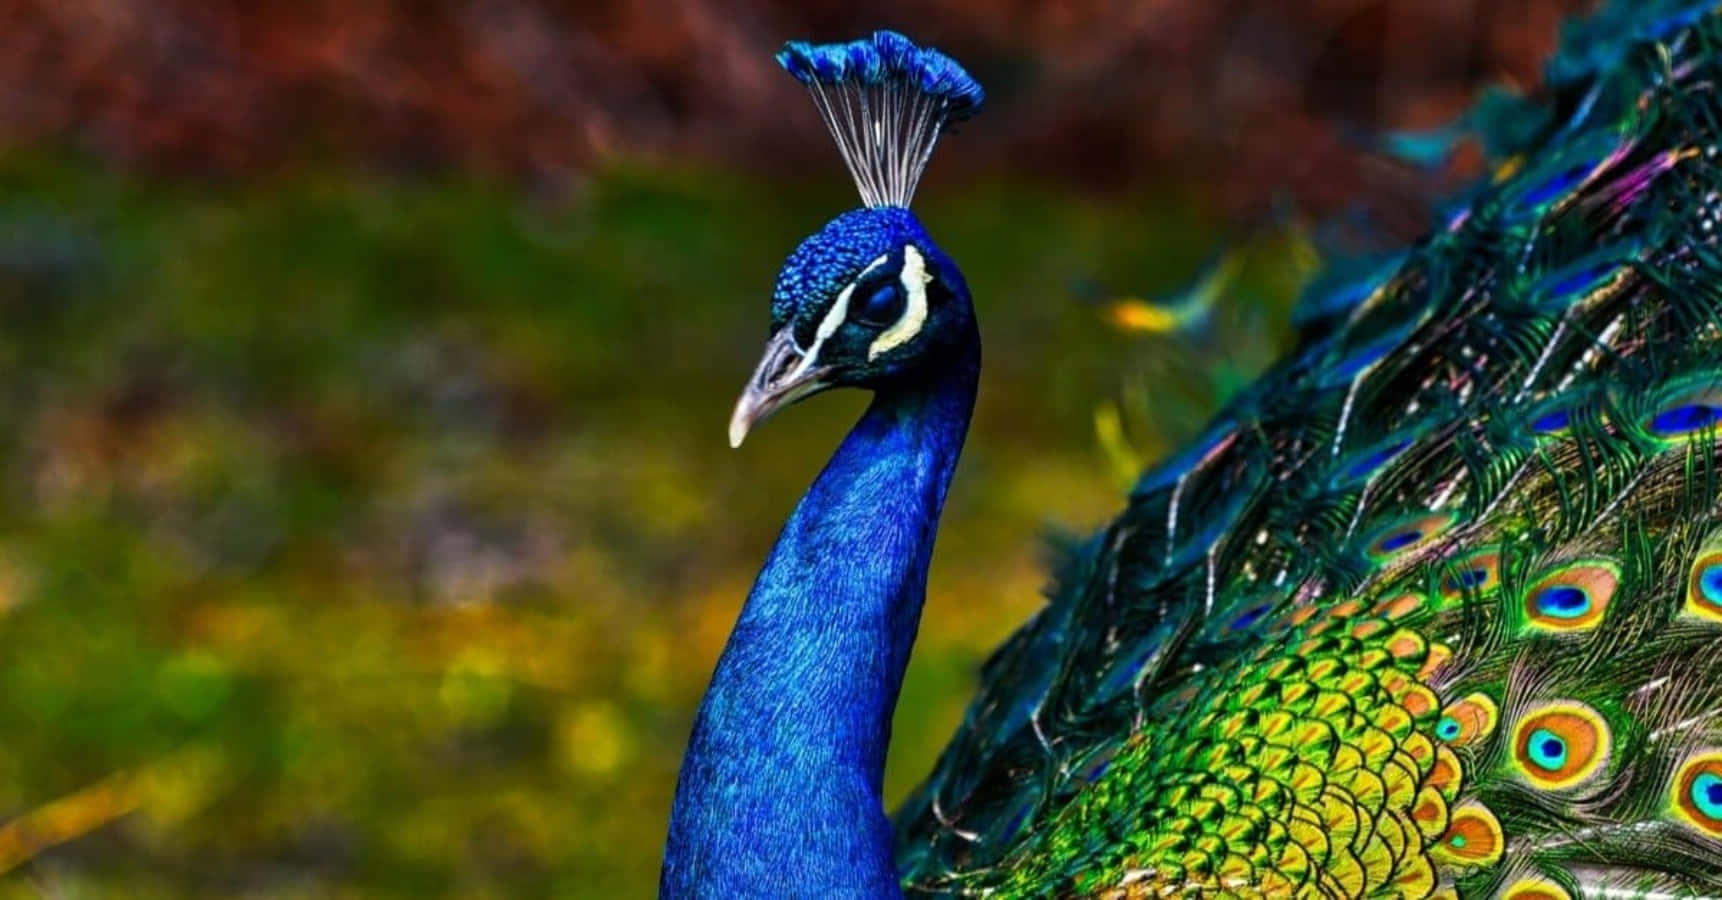 A Peacock Bird turns its majestic plumage